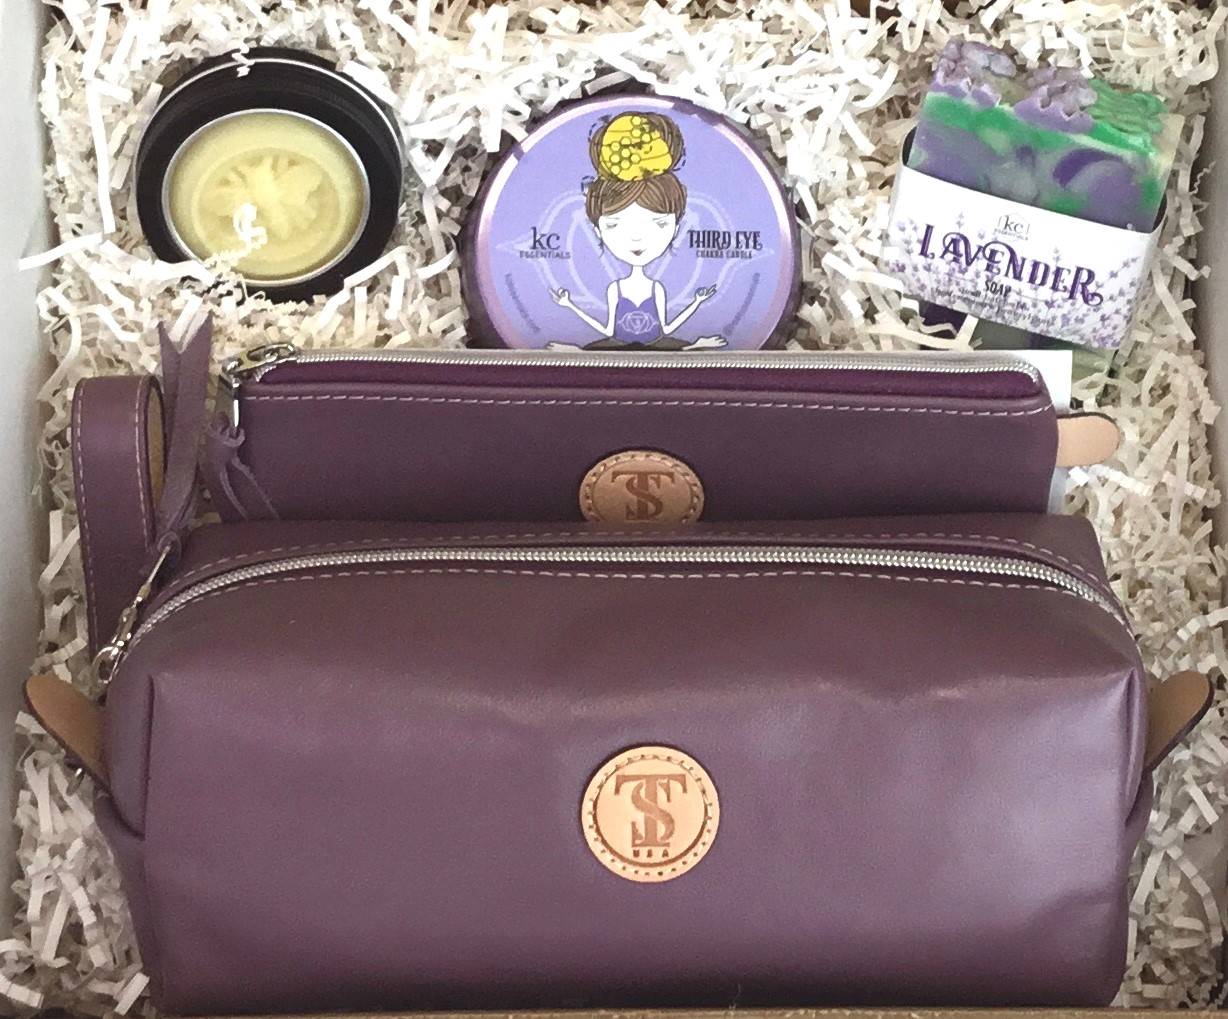 Town &amp; Shore Handcrafted Serenity Gift set featuring T5 Leather bath kit and brush bag shown in Lavender purple calfskin leather. KC Essentials artisan made vegan bar soap, scented soy chakra candle in a purple metal tin with a lady in a seated yoga pose on lid, and natural solid lotion bar in metal tin. Arranged in gift box with sustainable eco-friendly white crinkle paper.